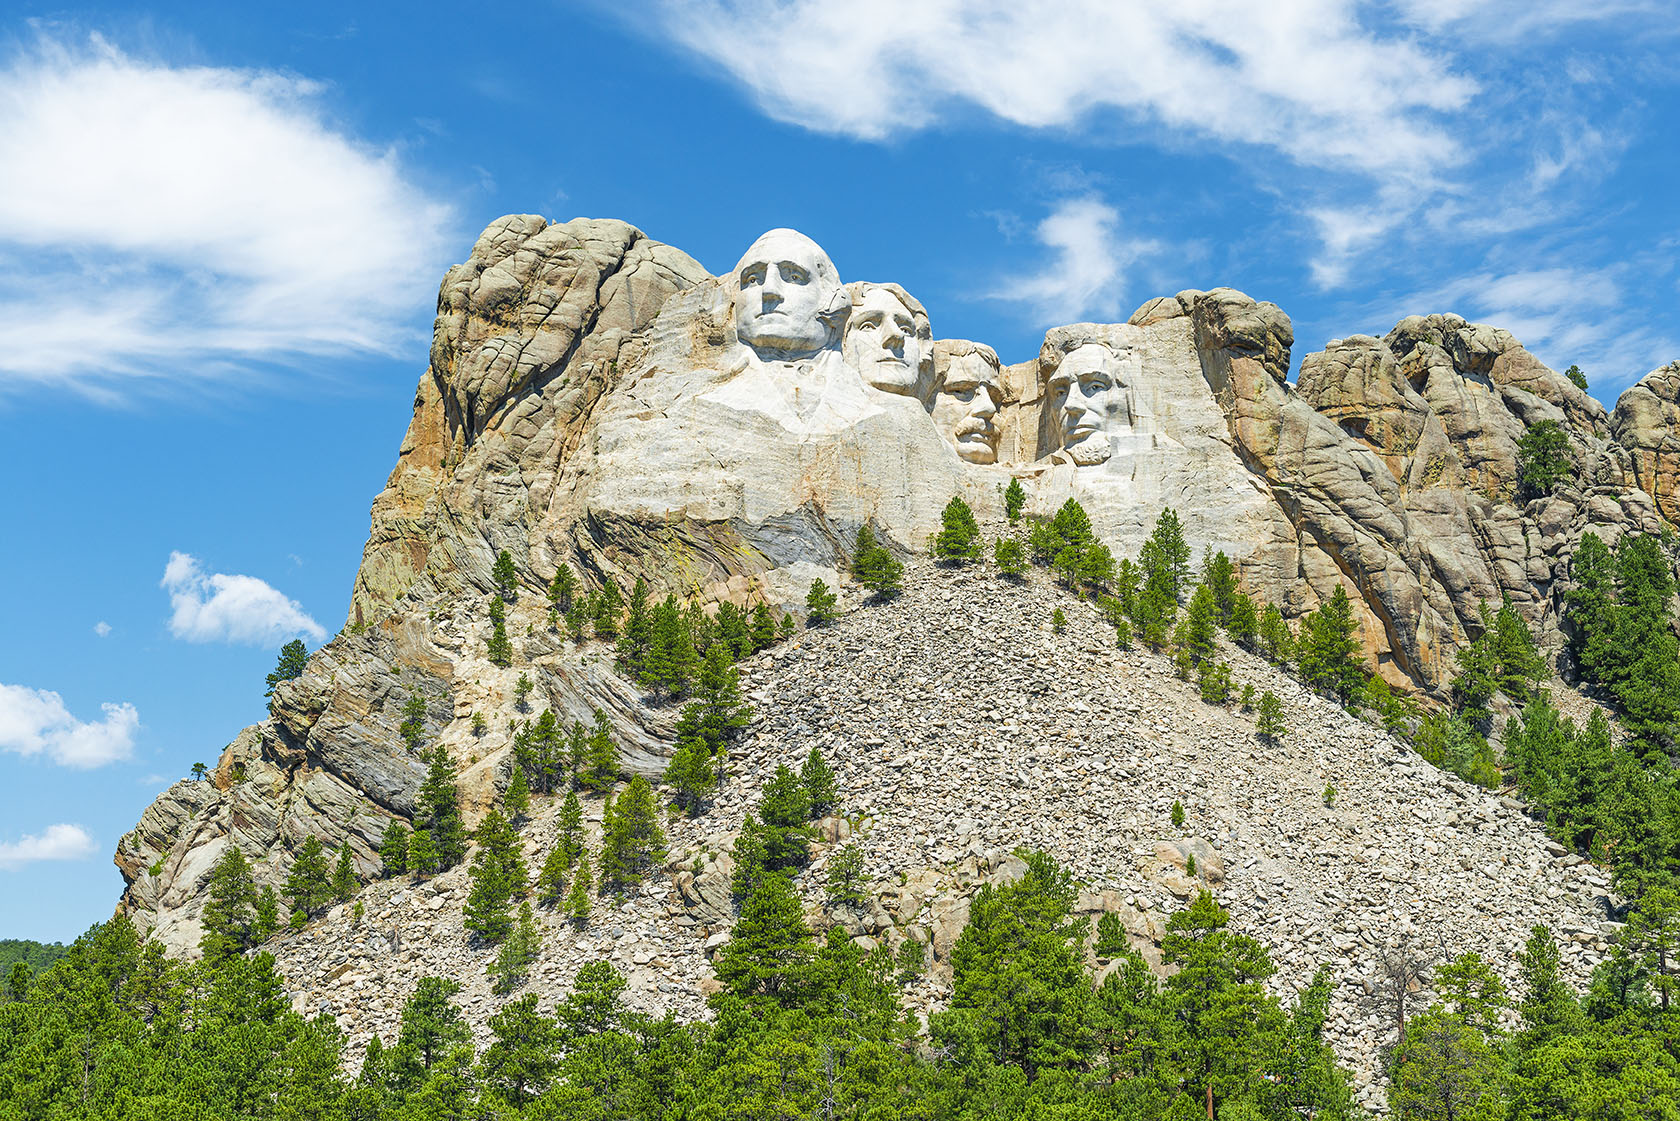 View of rock sculptures of four presidents against a clear blue sky.